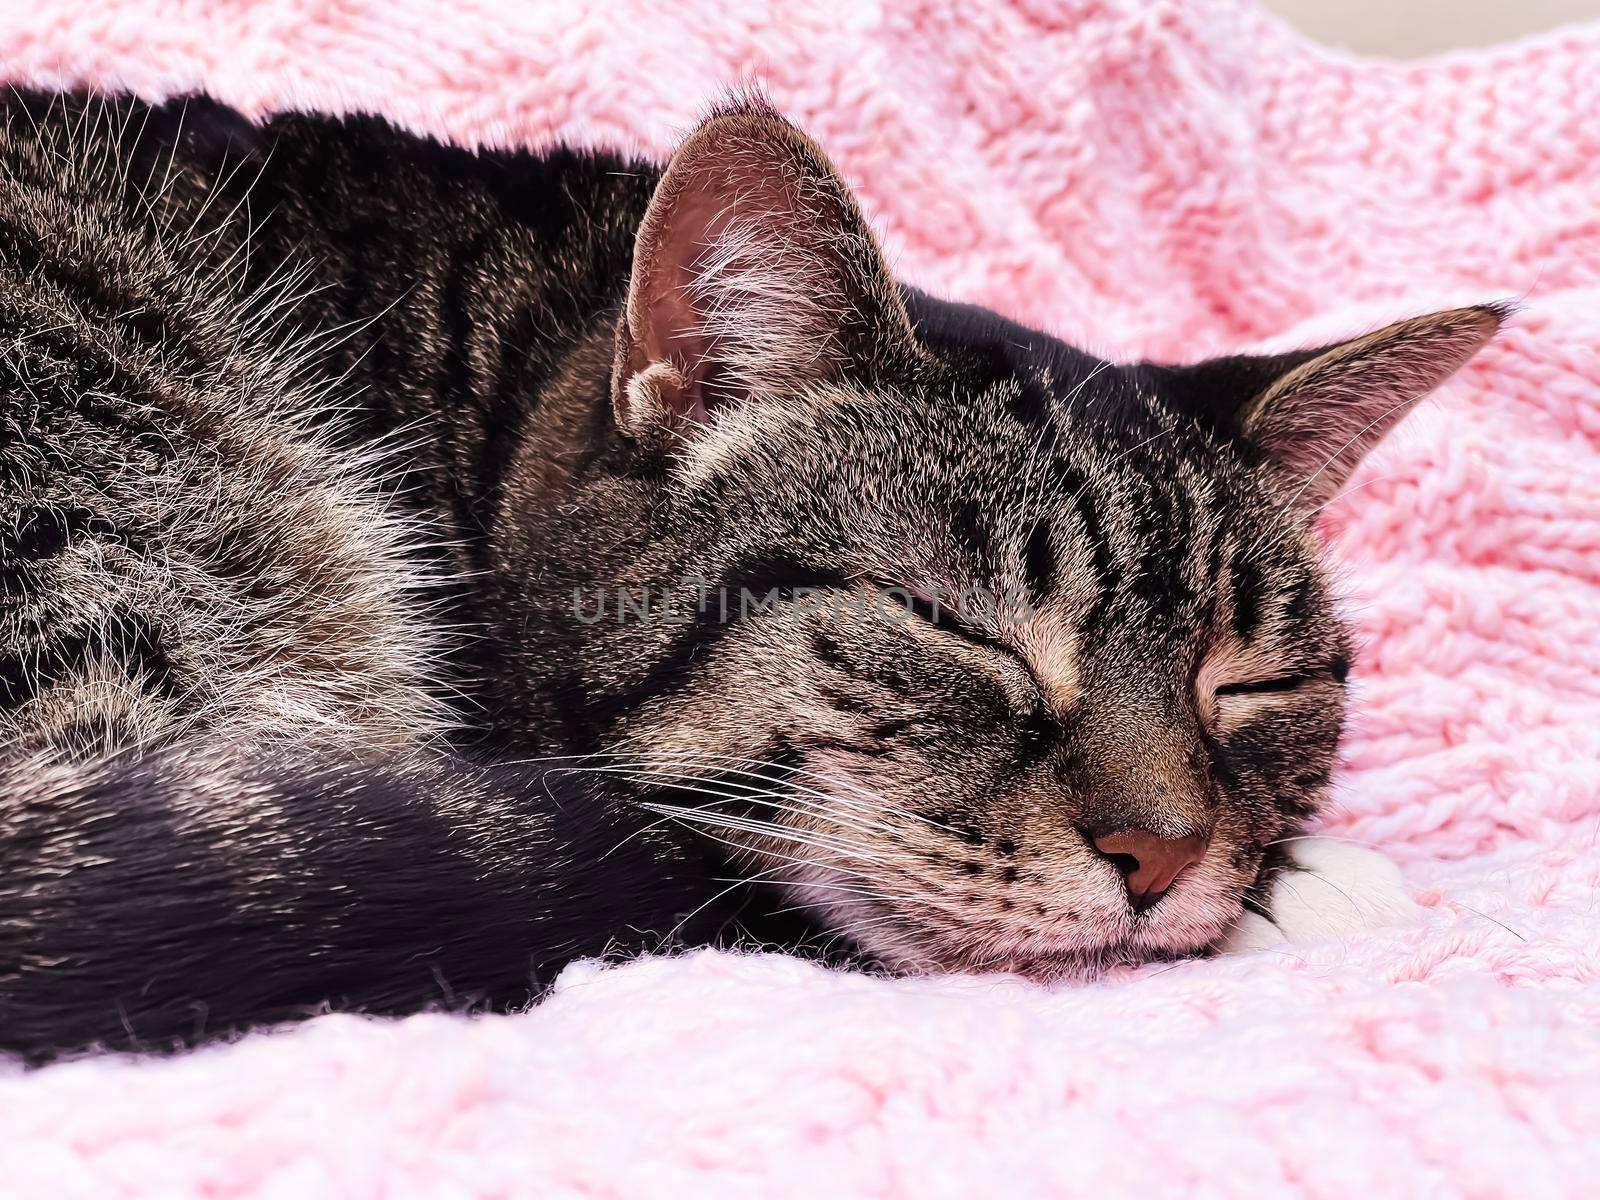 Beautiful female tabby cat on pink knitted blanket at home, adorable domestic pet portrait, close-up